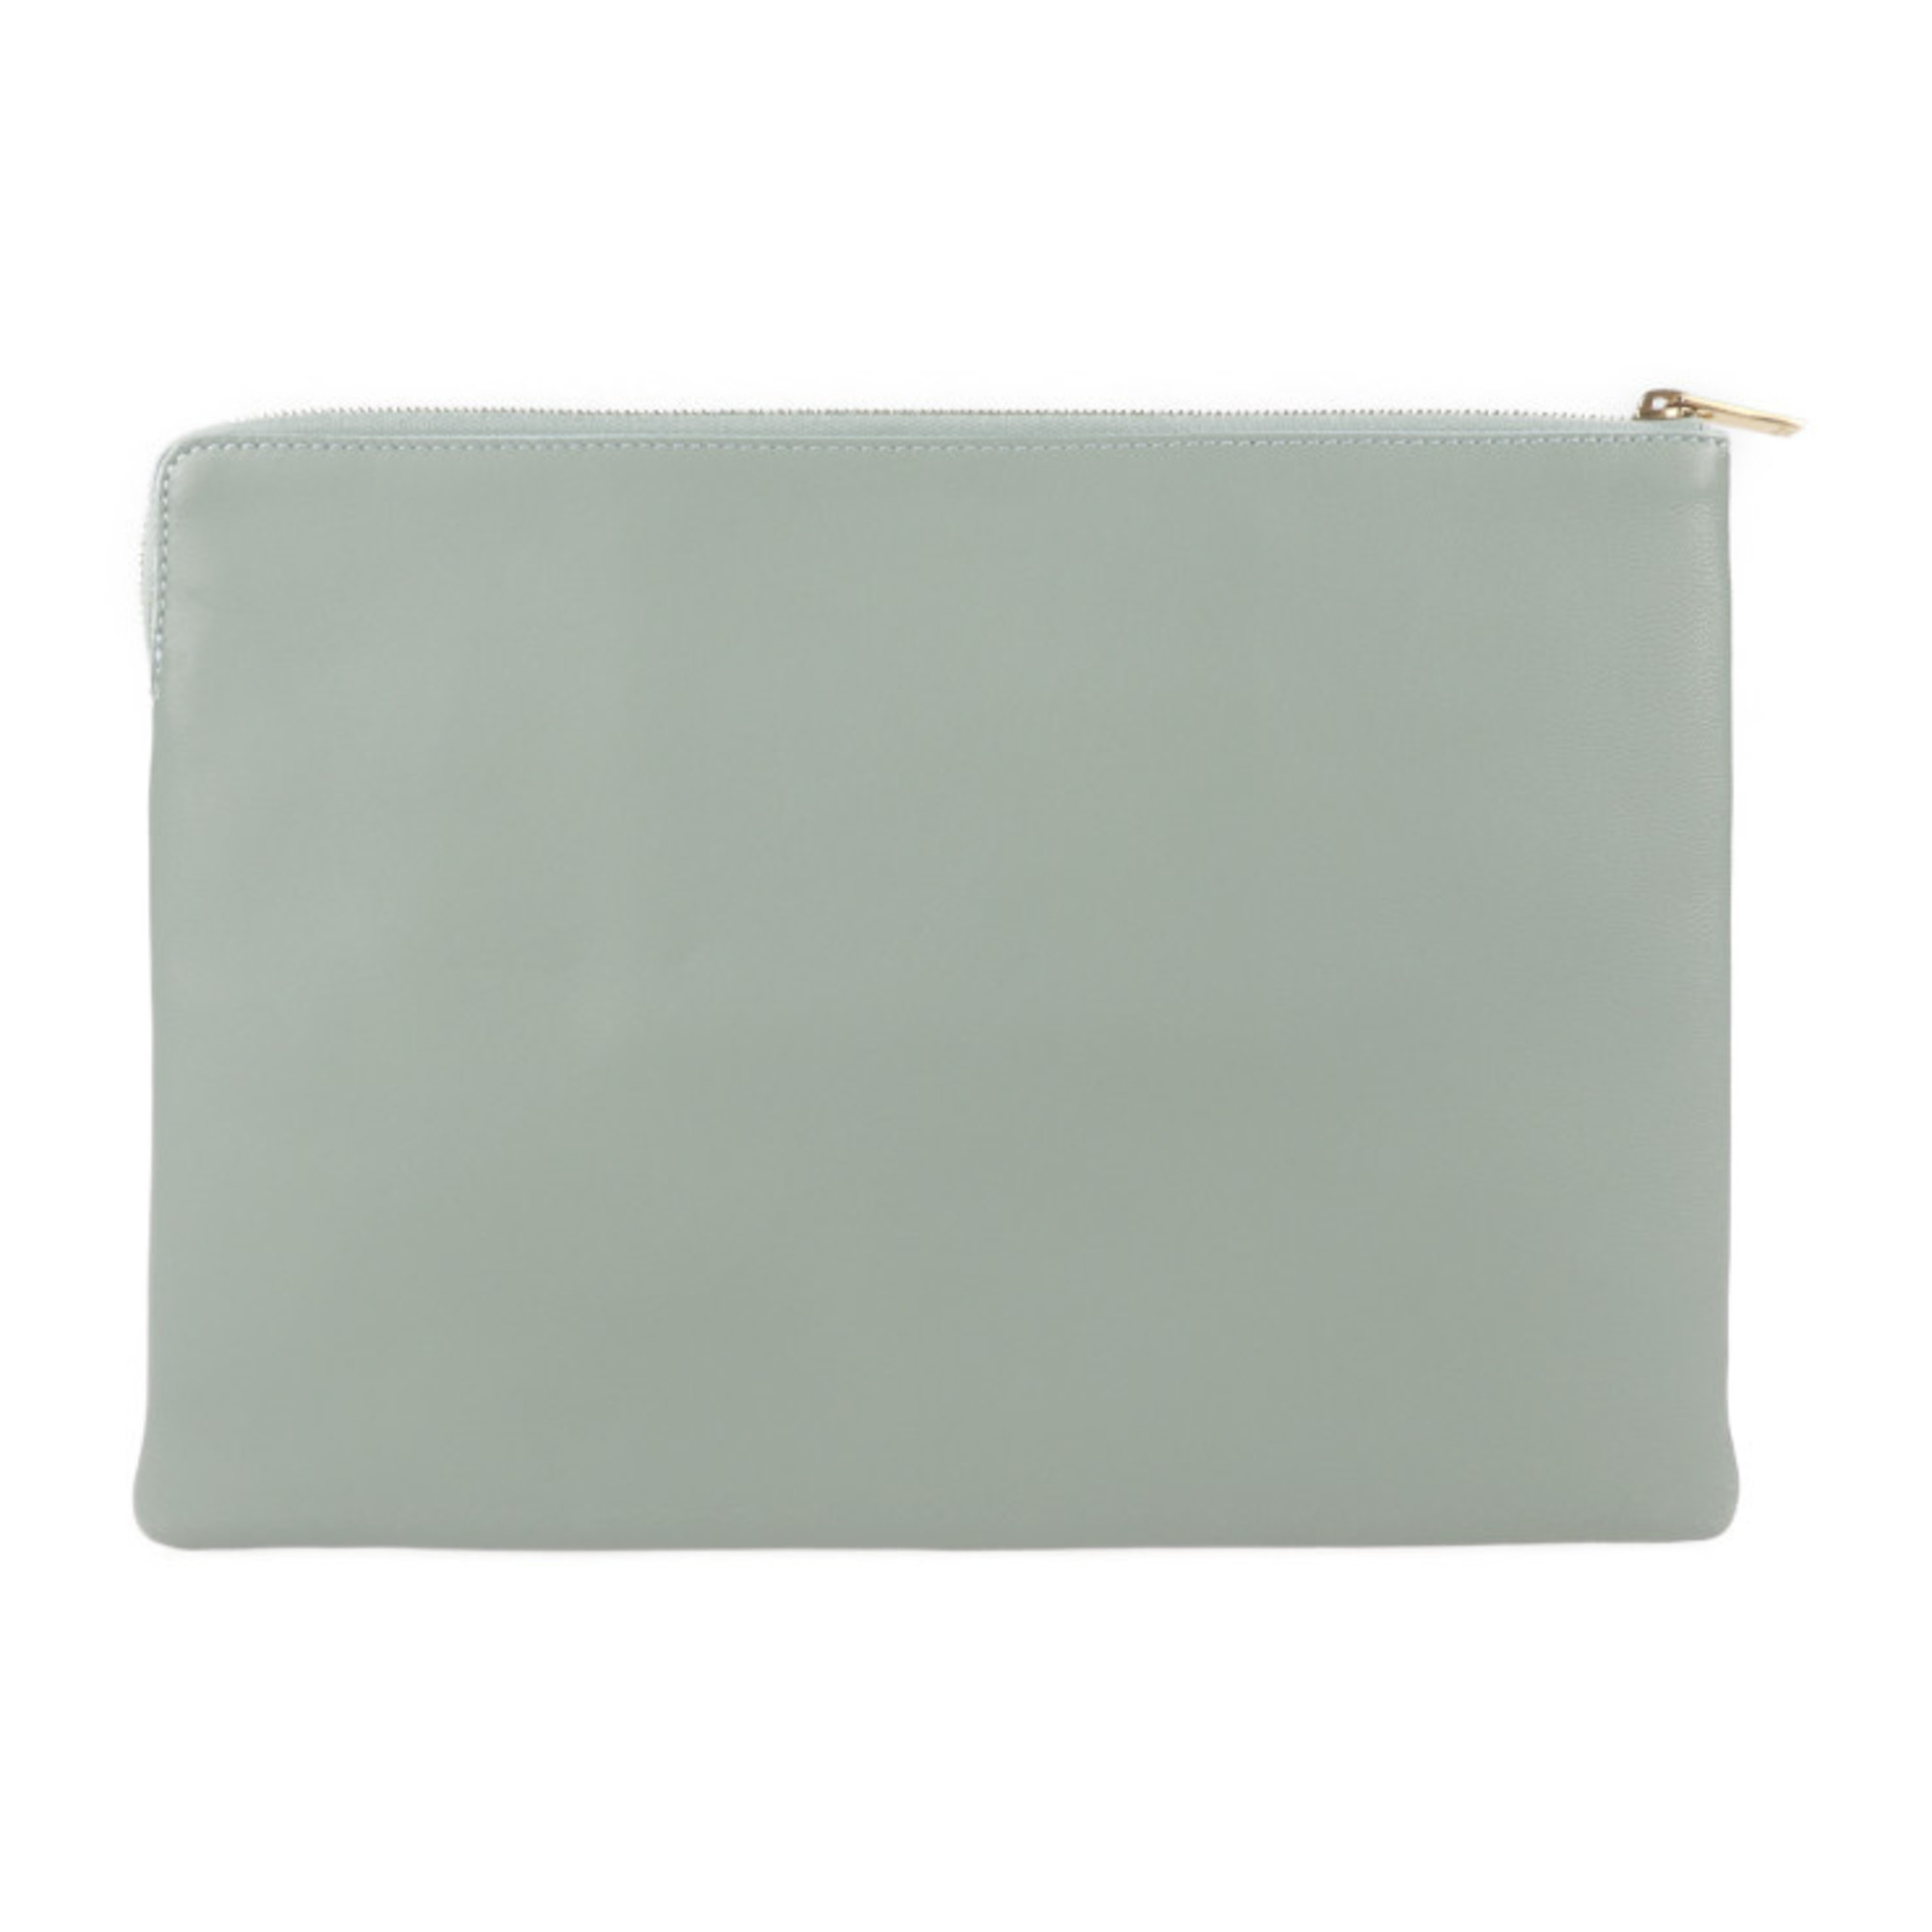 CELINE Celine clutch bag leather light green system gold metal fittings second pouch